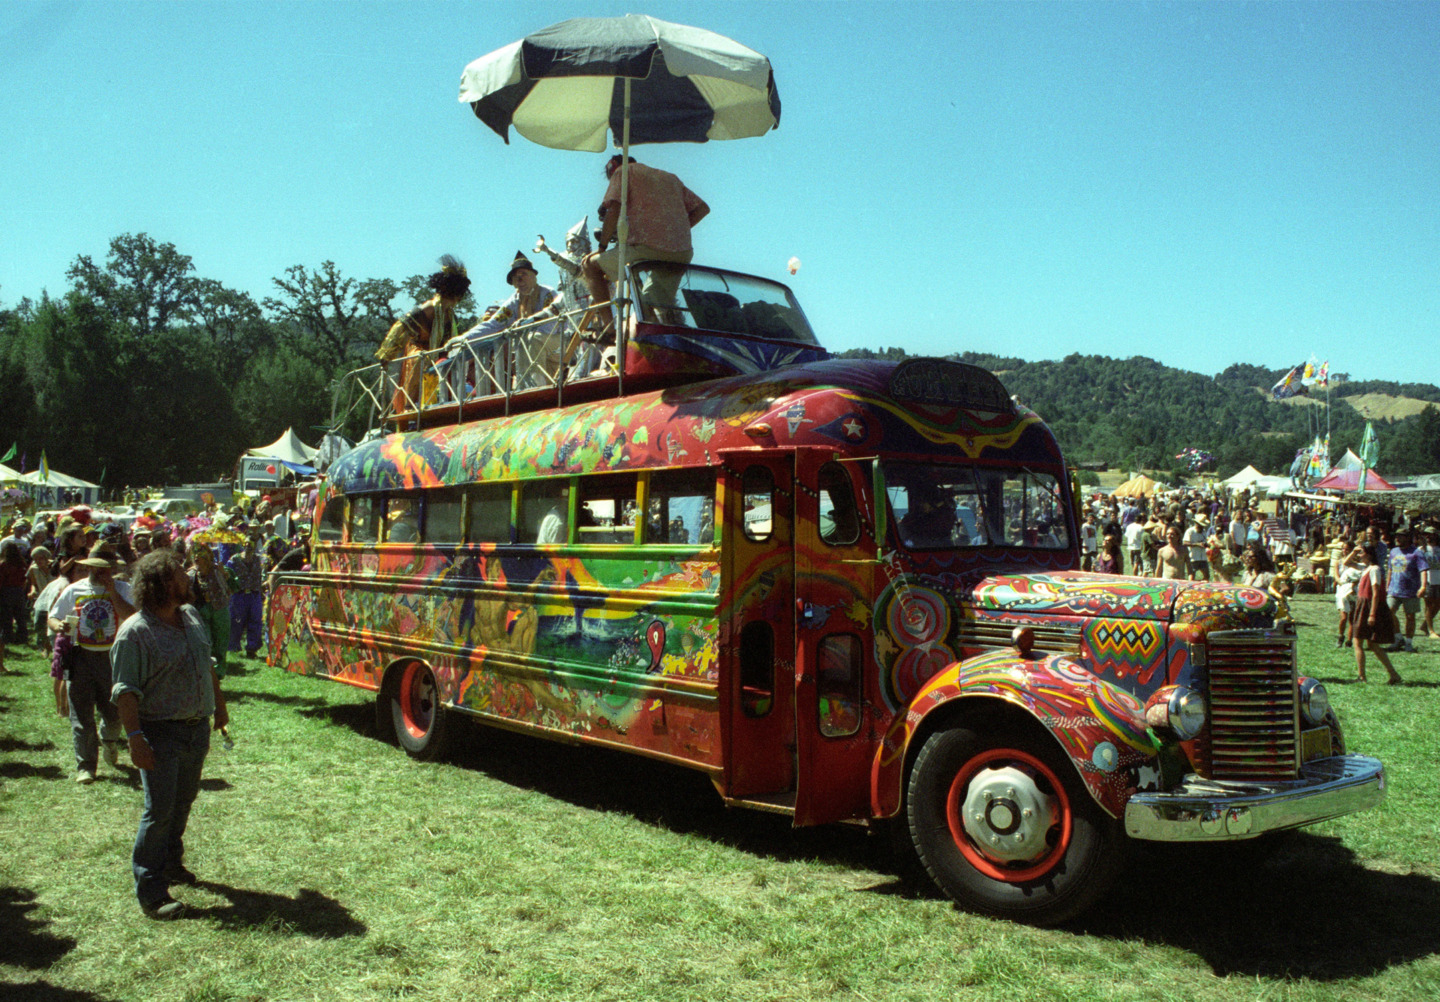 Ken Kessey and the Merry Prankster's Bus Painted in Psychedelic Colors at 1960's Music Festival